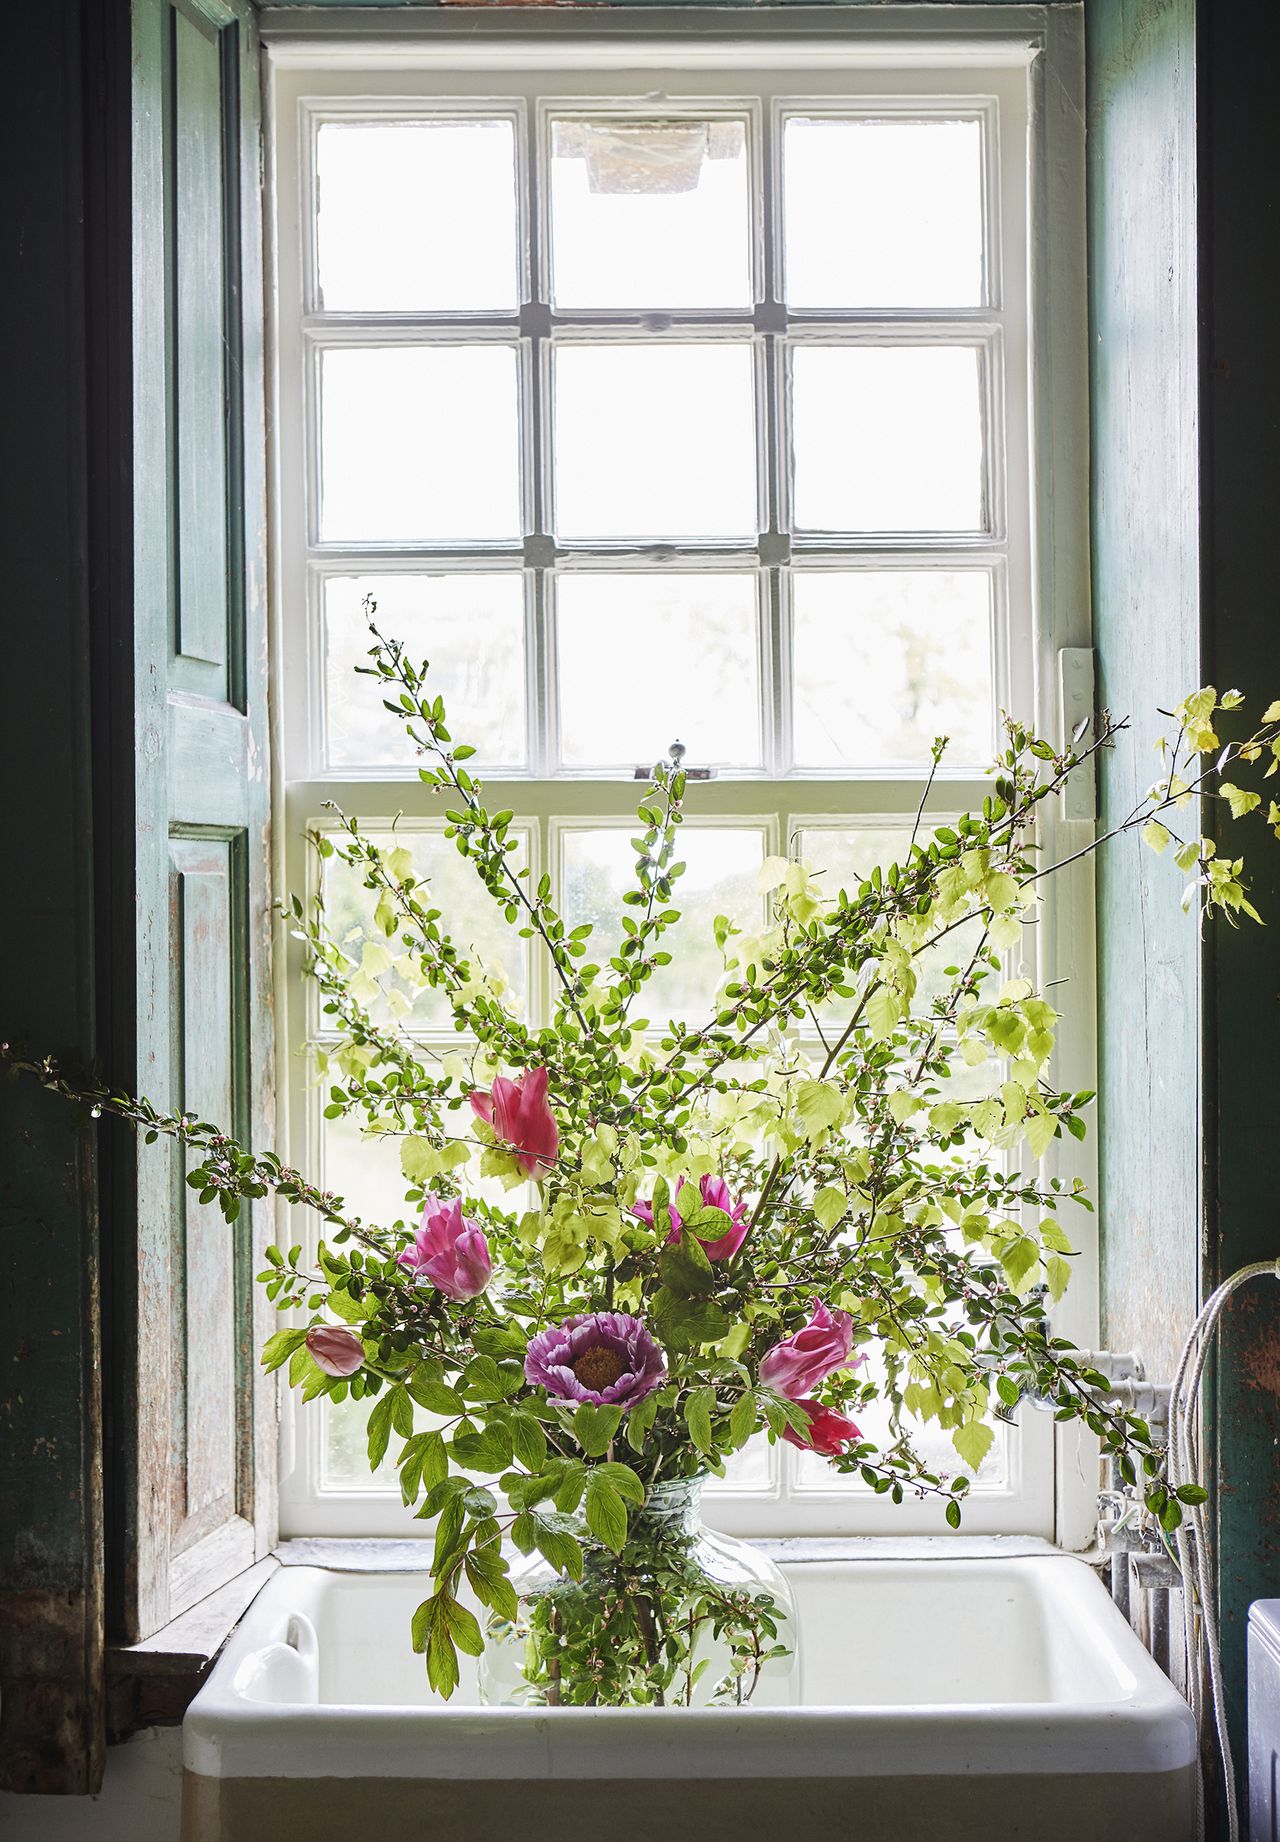 How to keep flowers fresh in a vase – 7 tips to remember | Homes & Gardens